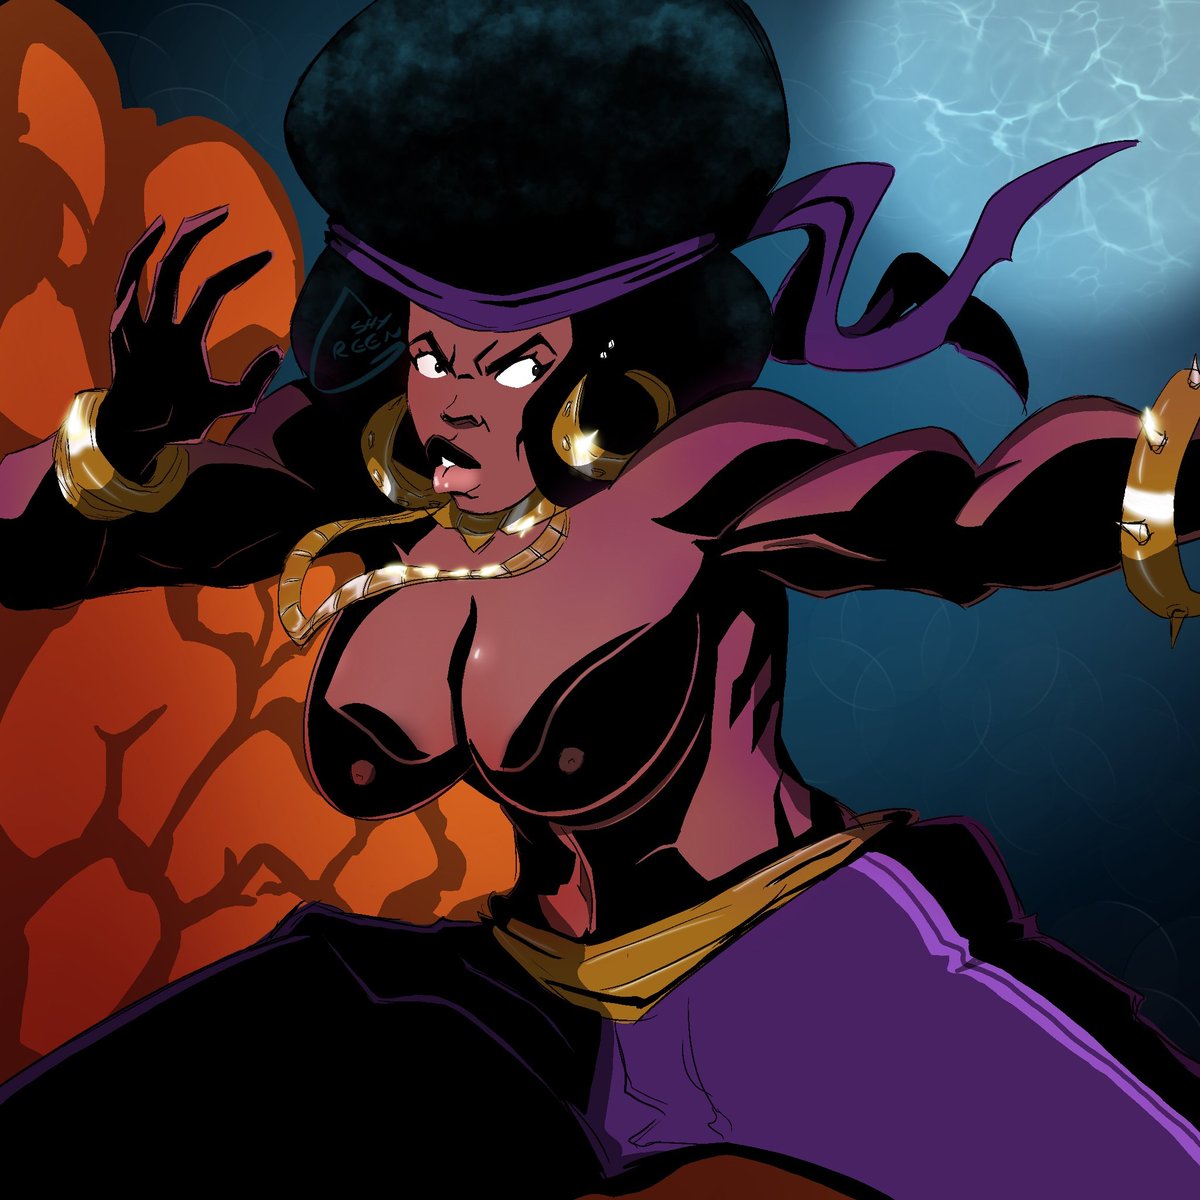 Some fun dark shadow studying from Black Dynamite. 